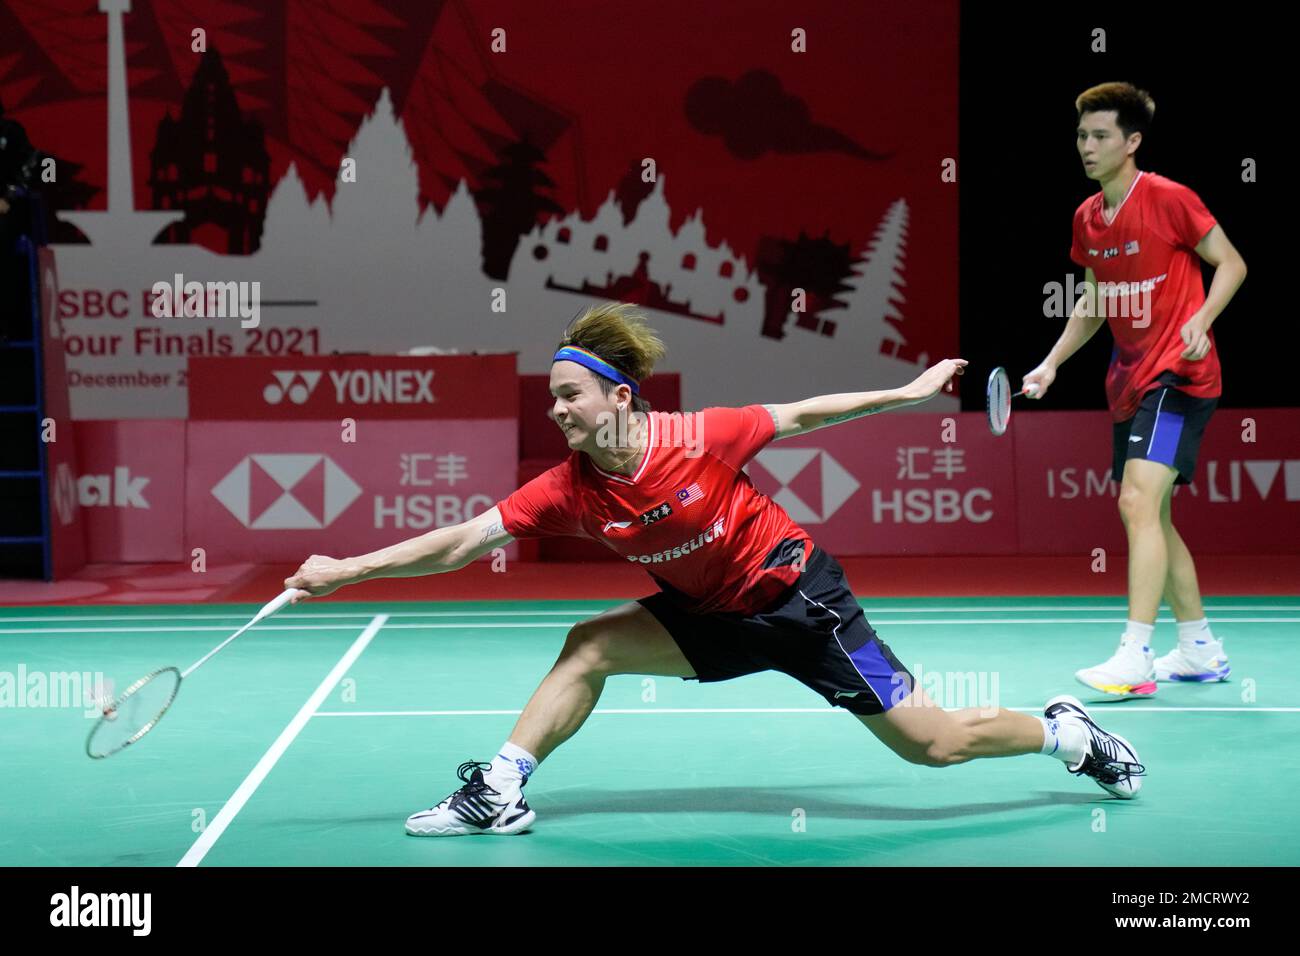 Malaysias Ong Yew Sin, right, and Teo Ee Yi compete against France Christo and Toma Junior Popov during their mens doubles Group B badminton match at the BWF World Tour Finals in